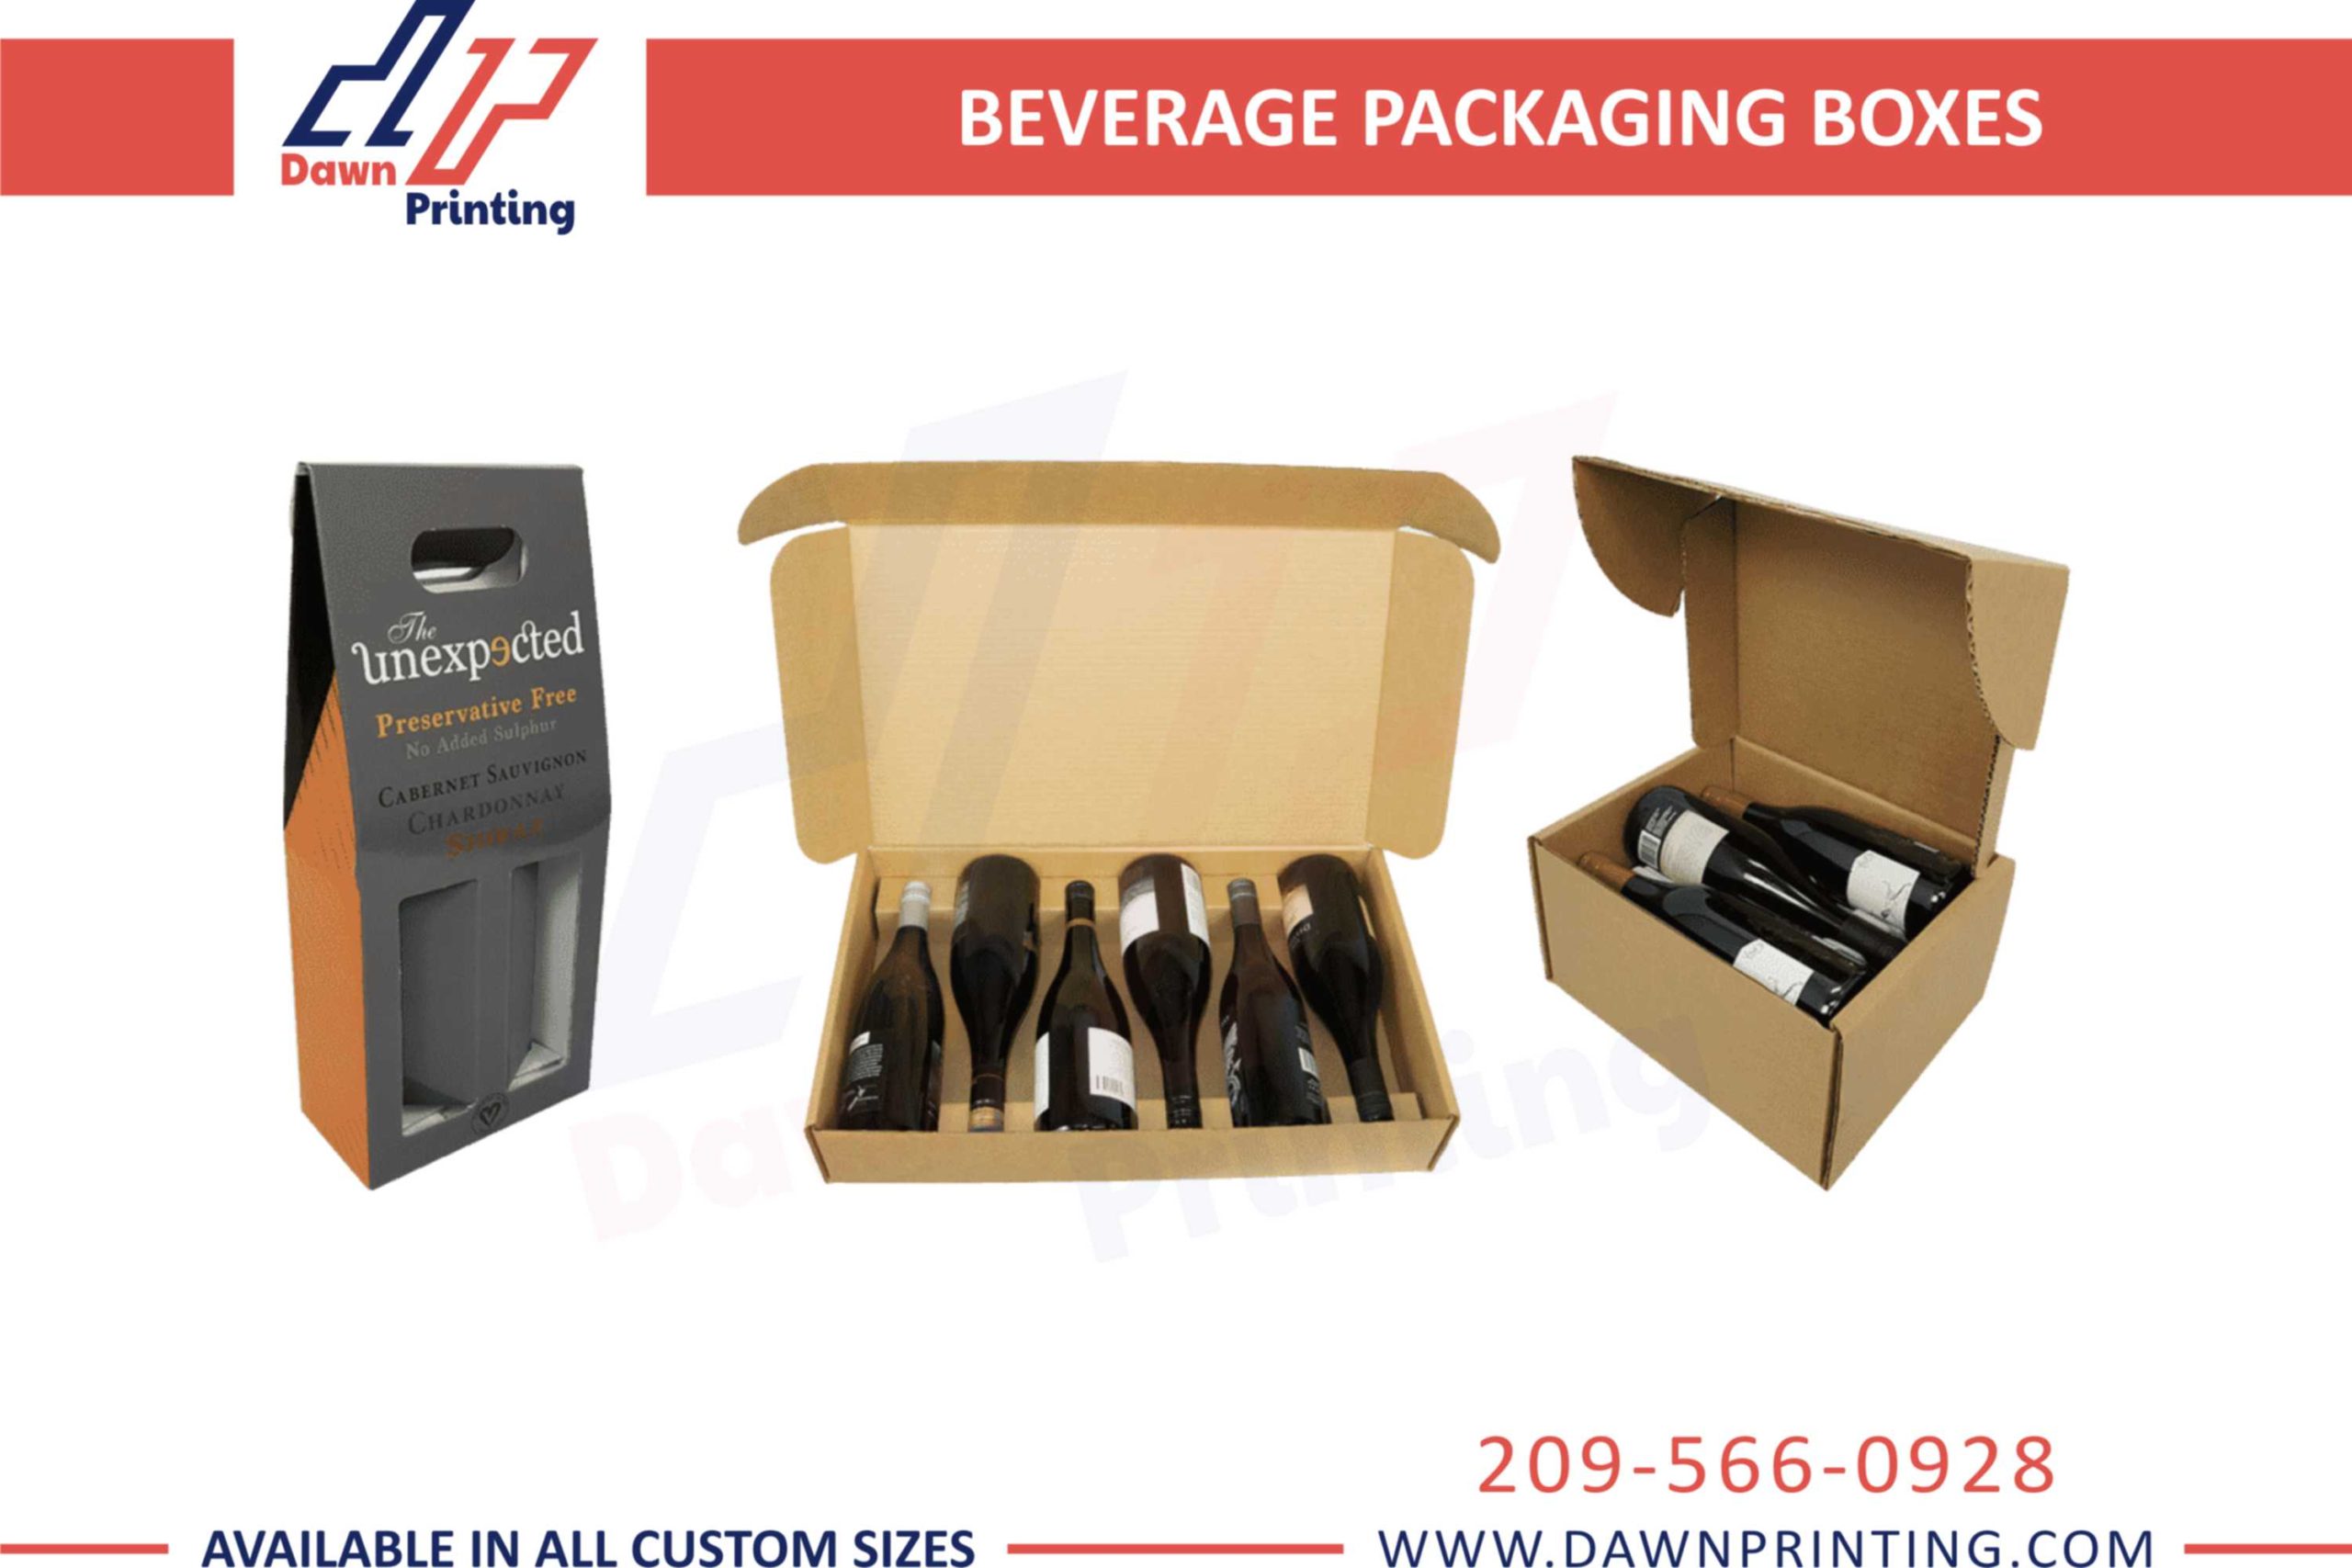 Systems for the production of customised packaging for beverage